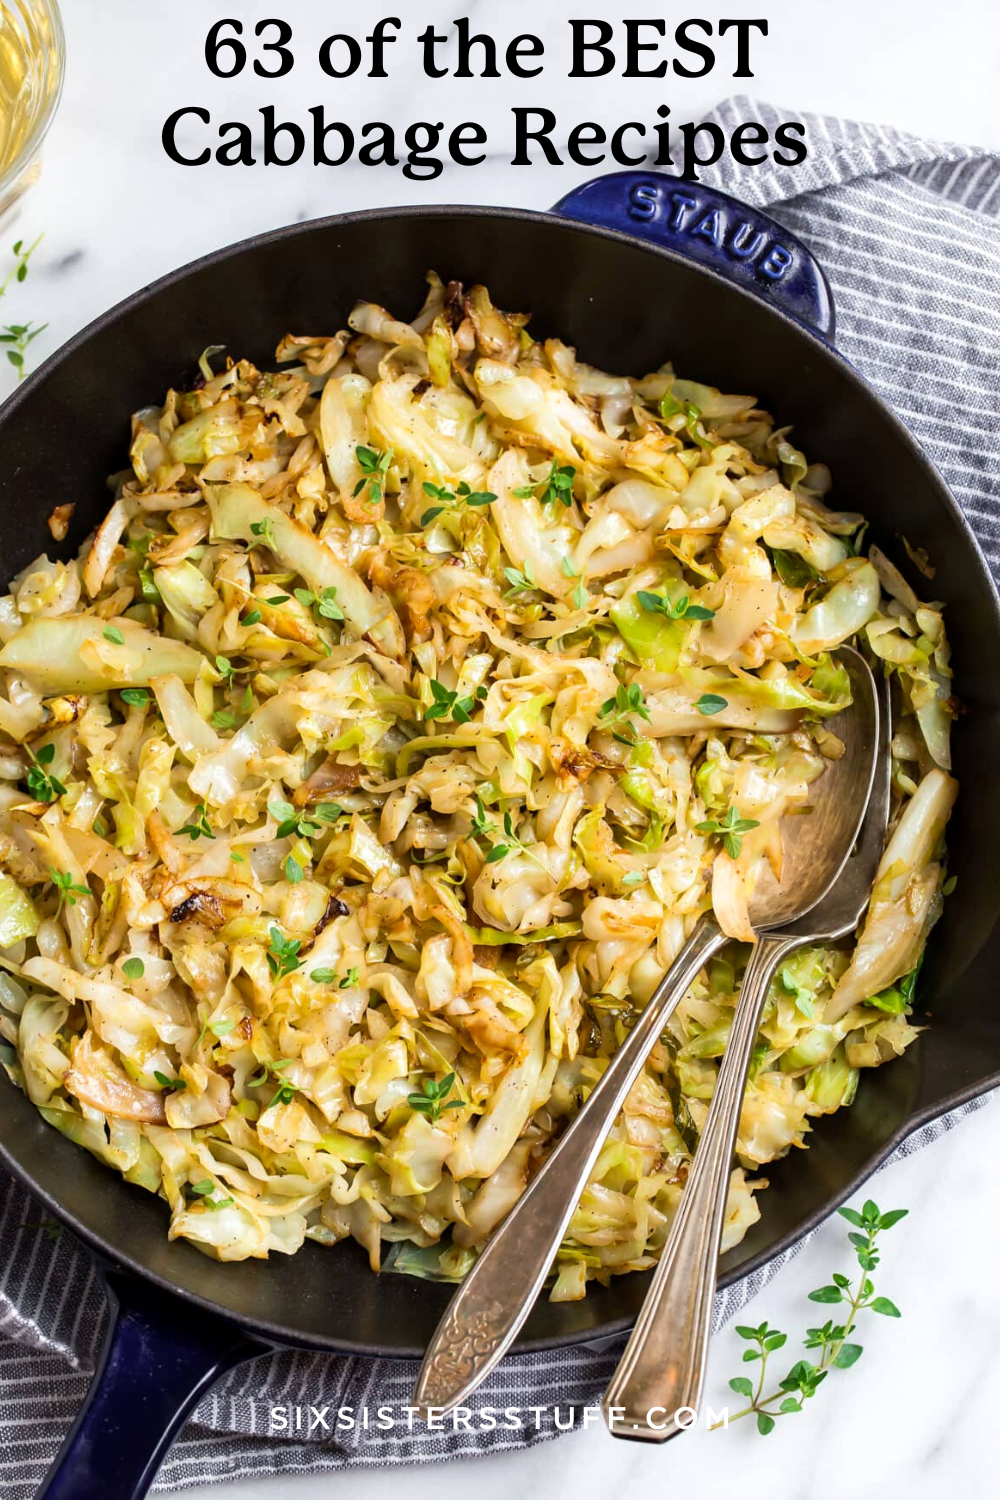 63 of the BEST Cabbage Recipes